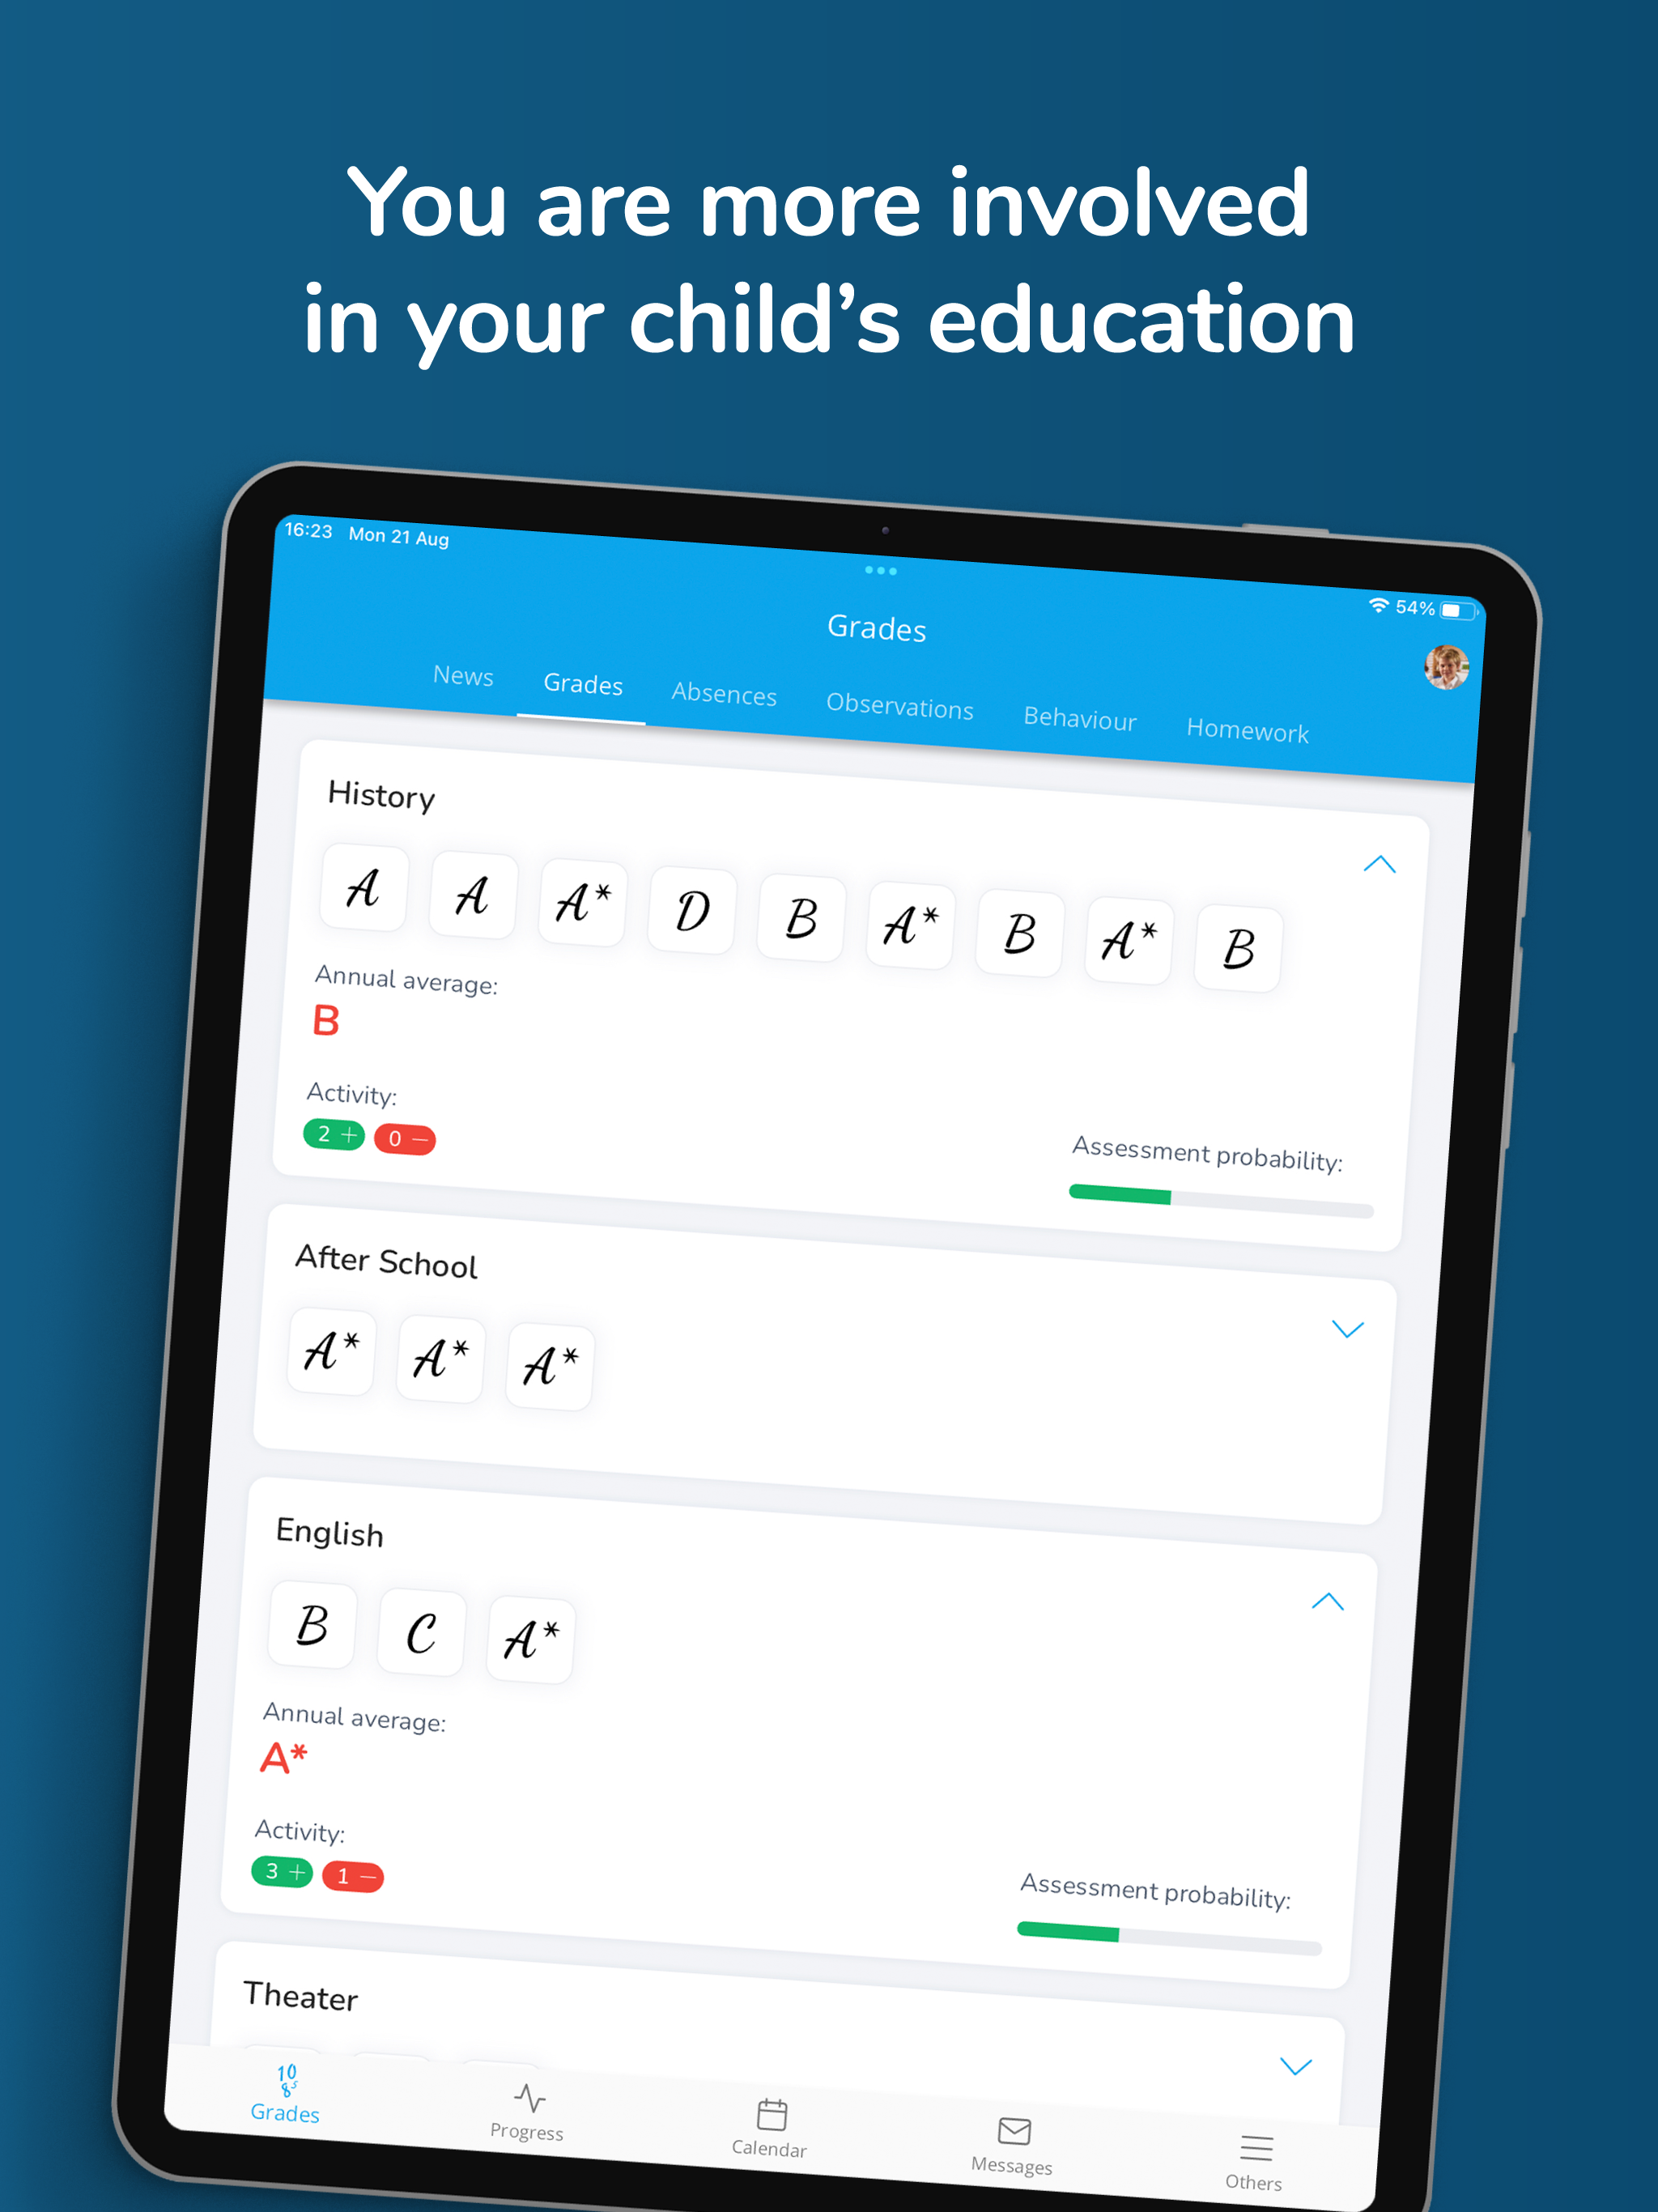 As a parent, you are more involved in your child's education. You have access to the grades and absences from anywhere, you can see your child progress over time, communicate directly, on a single platform with their teachers and other parents.